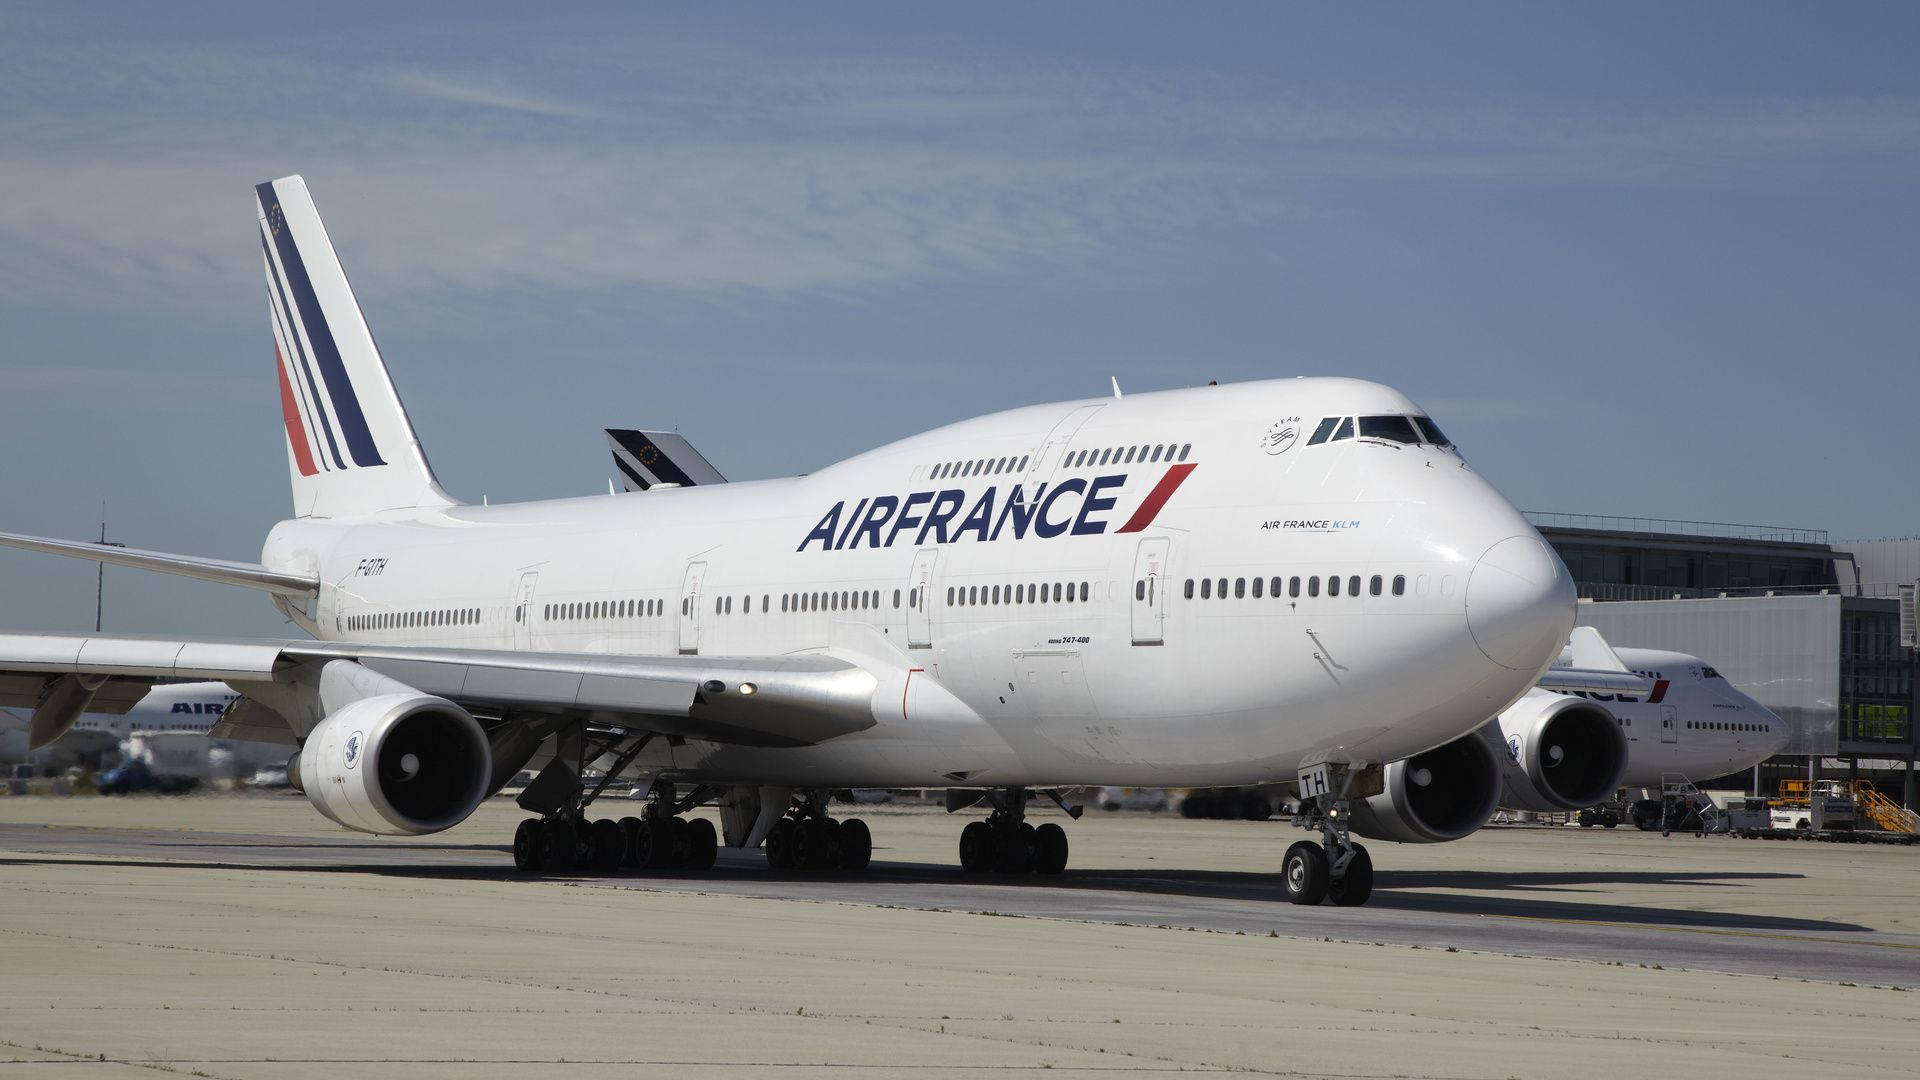 Jumboair France Boeing B747 Would Be Translated To 